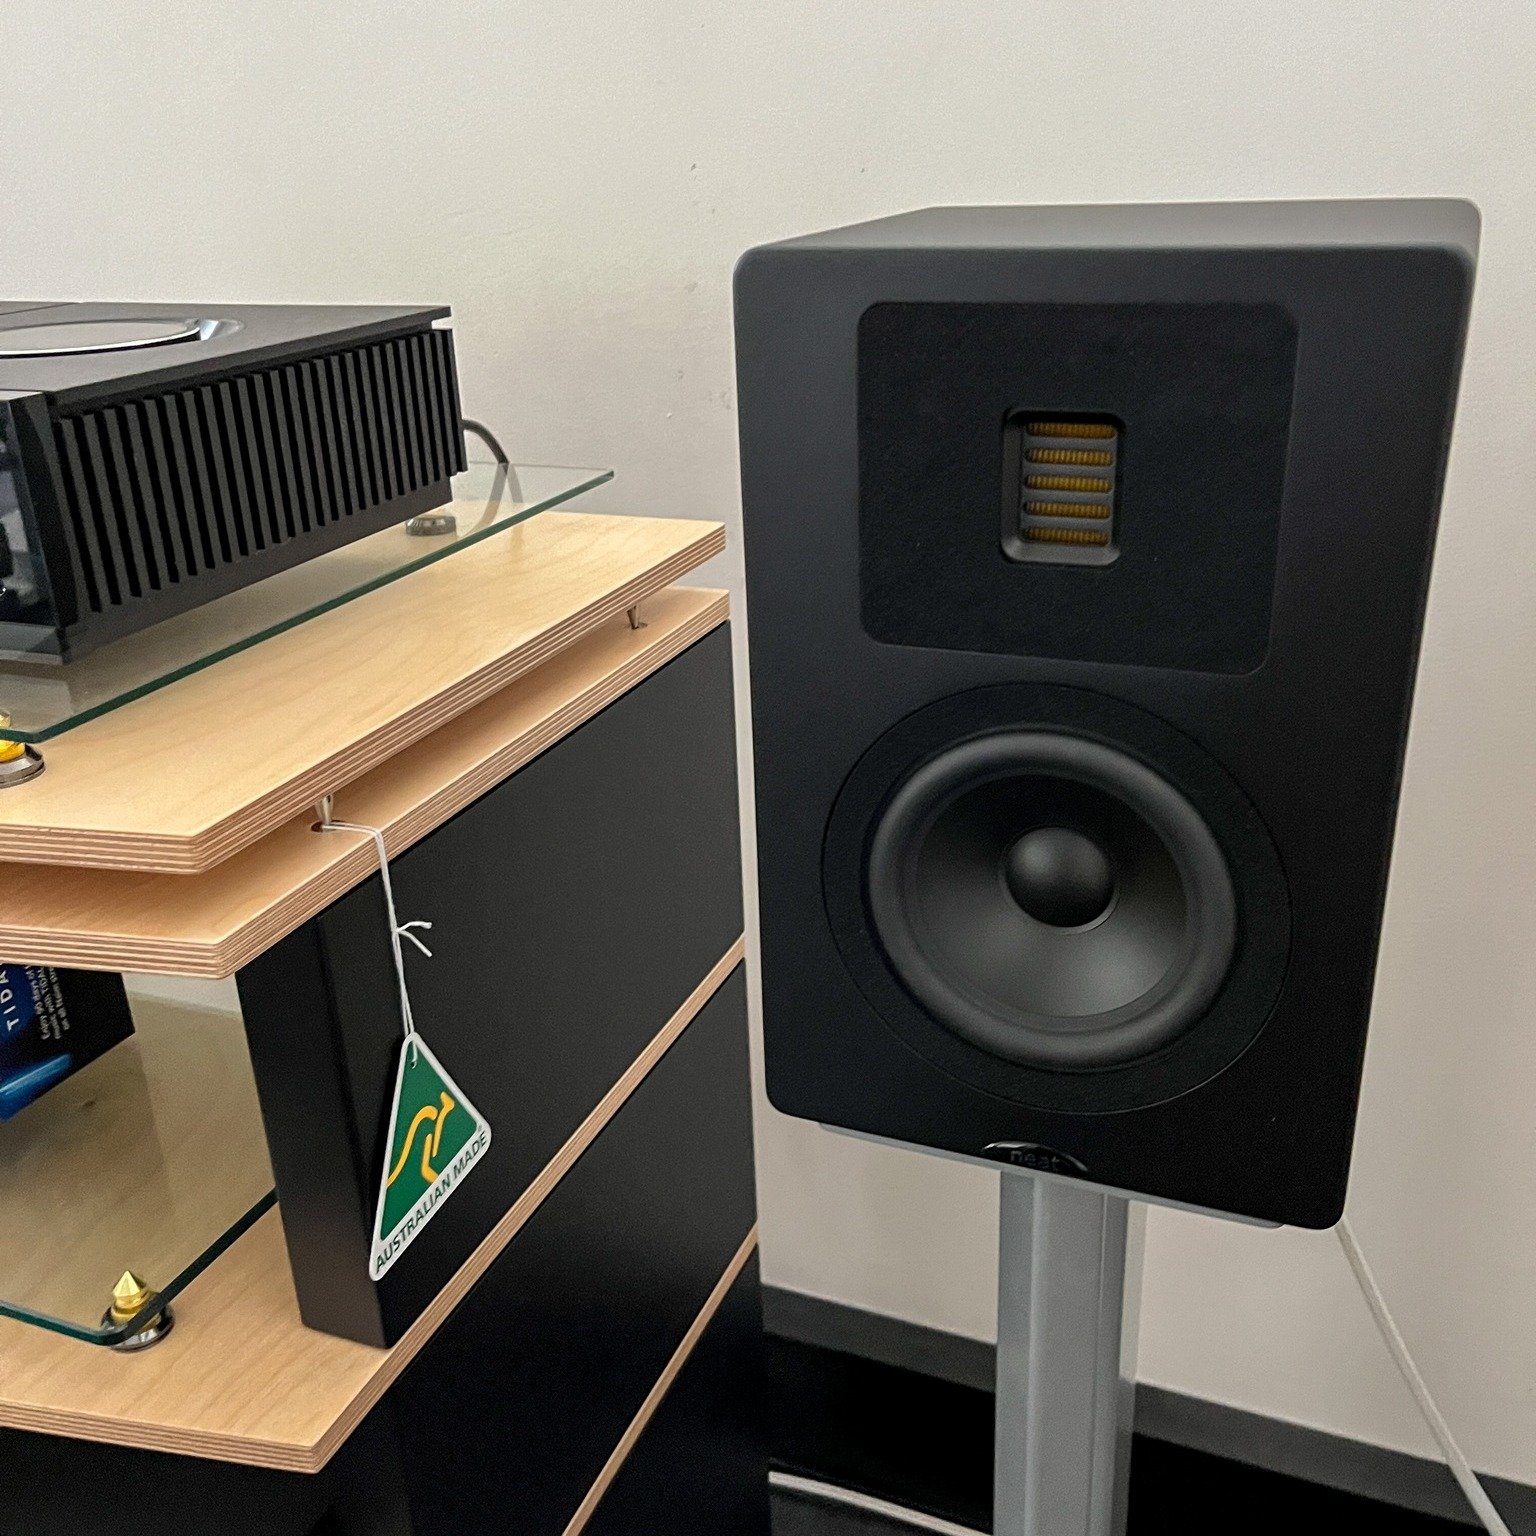 The Petite Classic from @neatacoustics is an all-new design of original Petite from 1991, a firm favourite with audio enthusiasts. The Petite Classic brings reworked components and improvements across the board whilst staying true to the original Pet